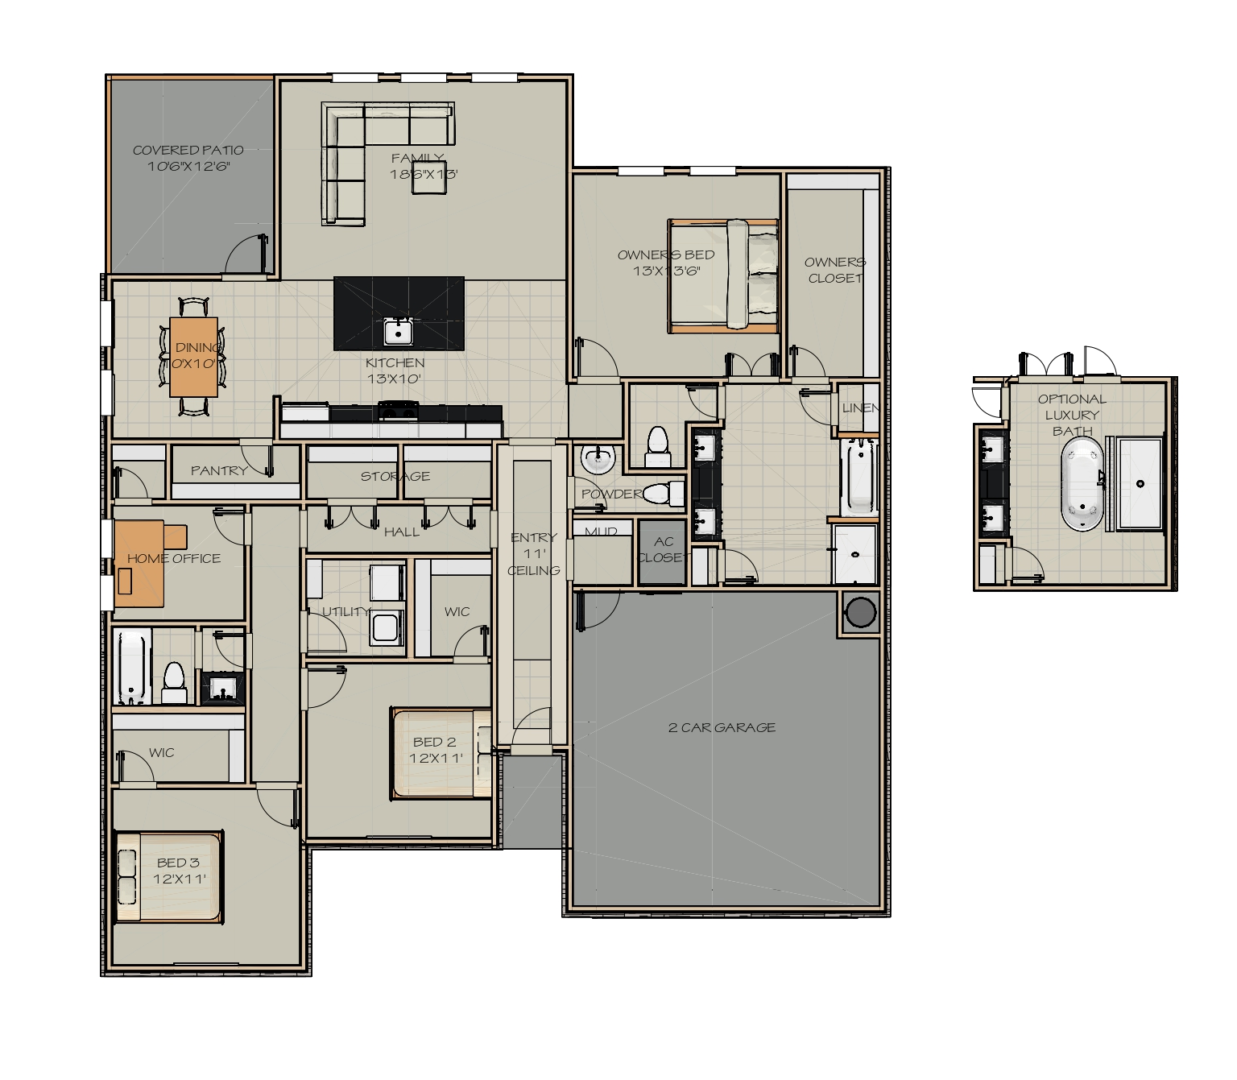 A floor plan of a house with two bedrooms and two bathrooms.